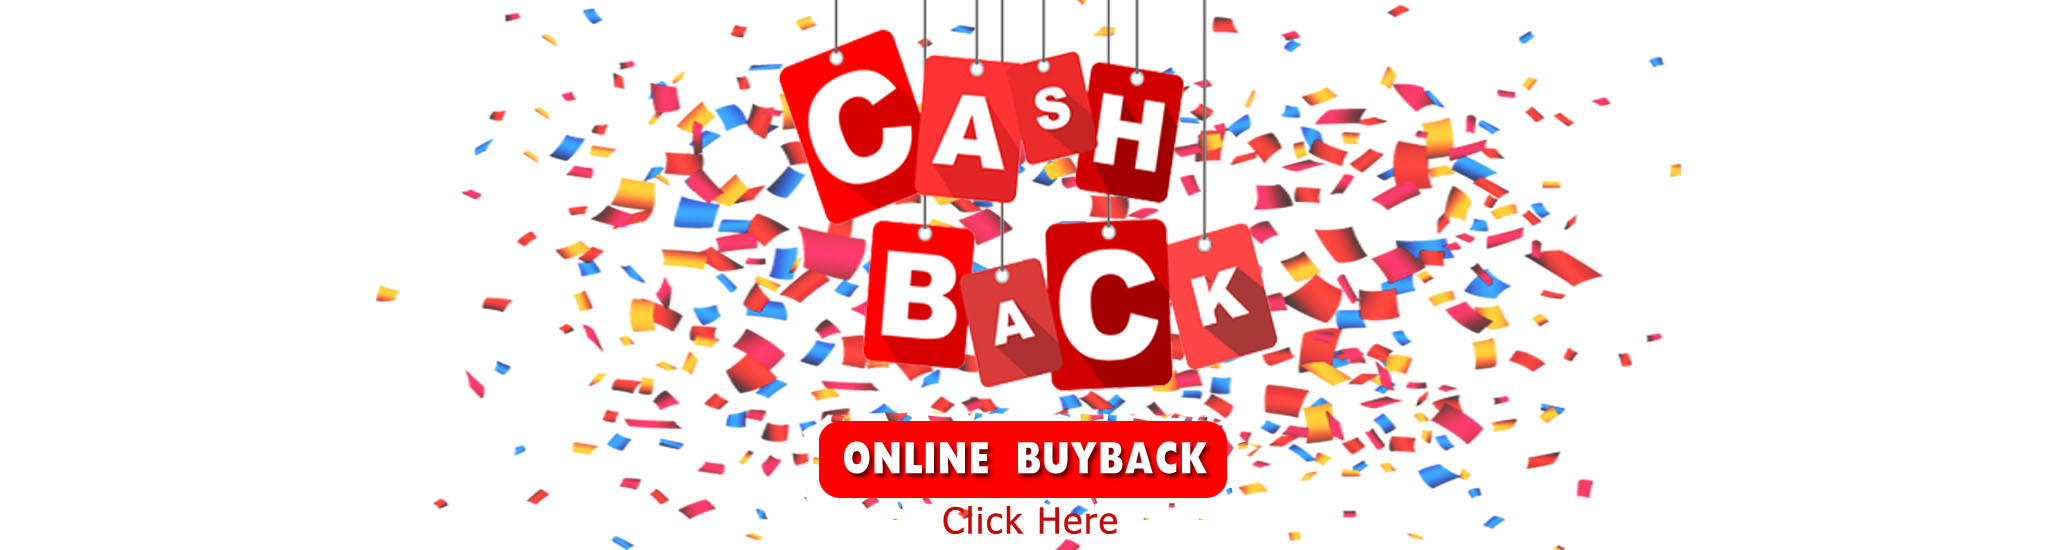 Cash back for your books. Click here to sell your books.